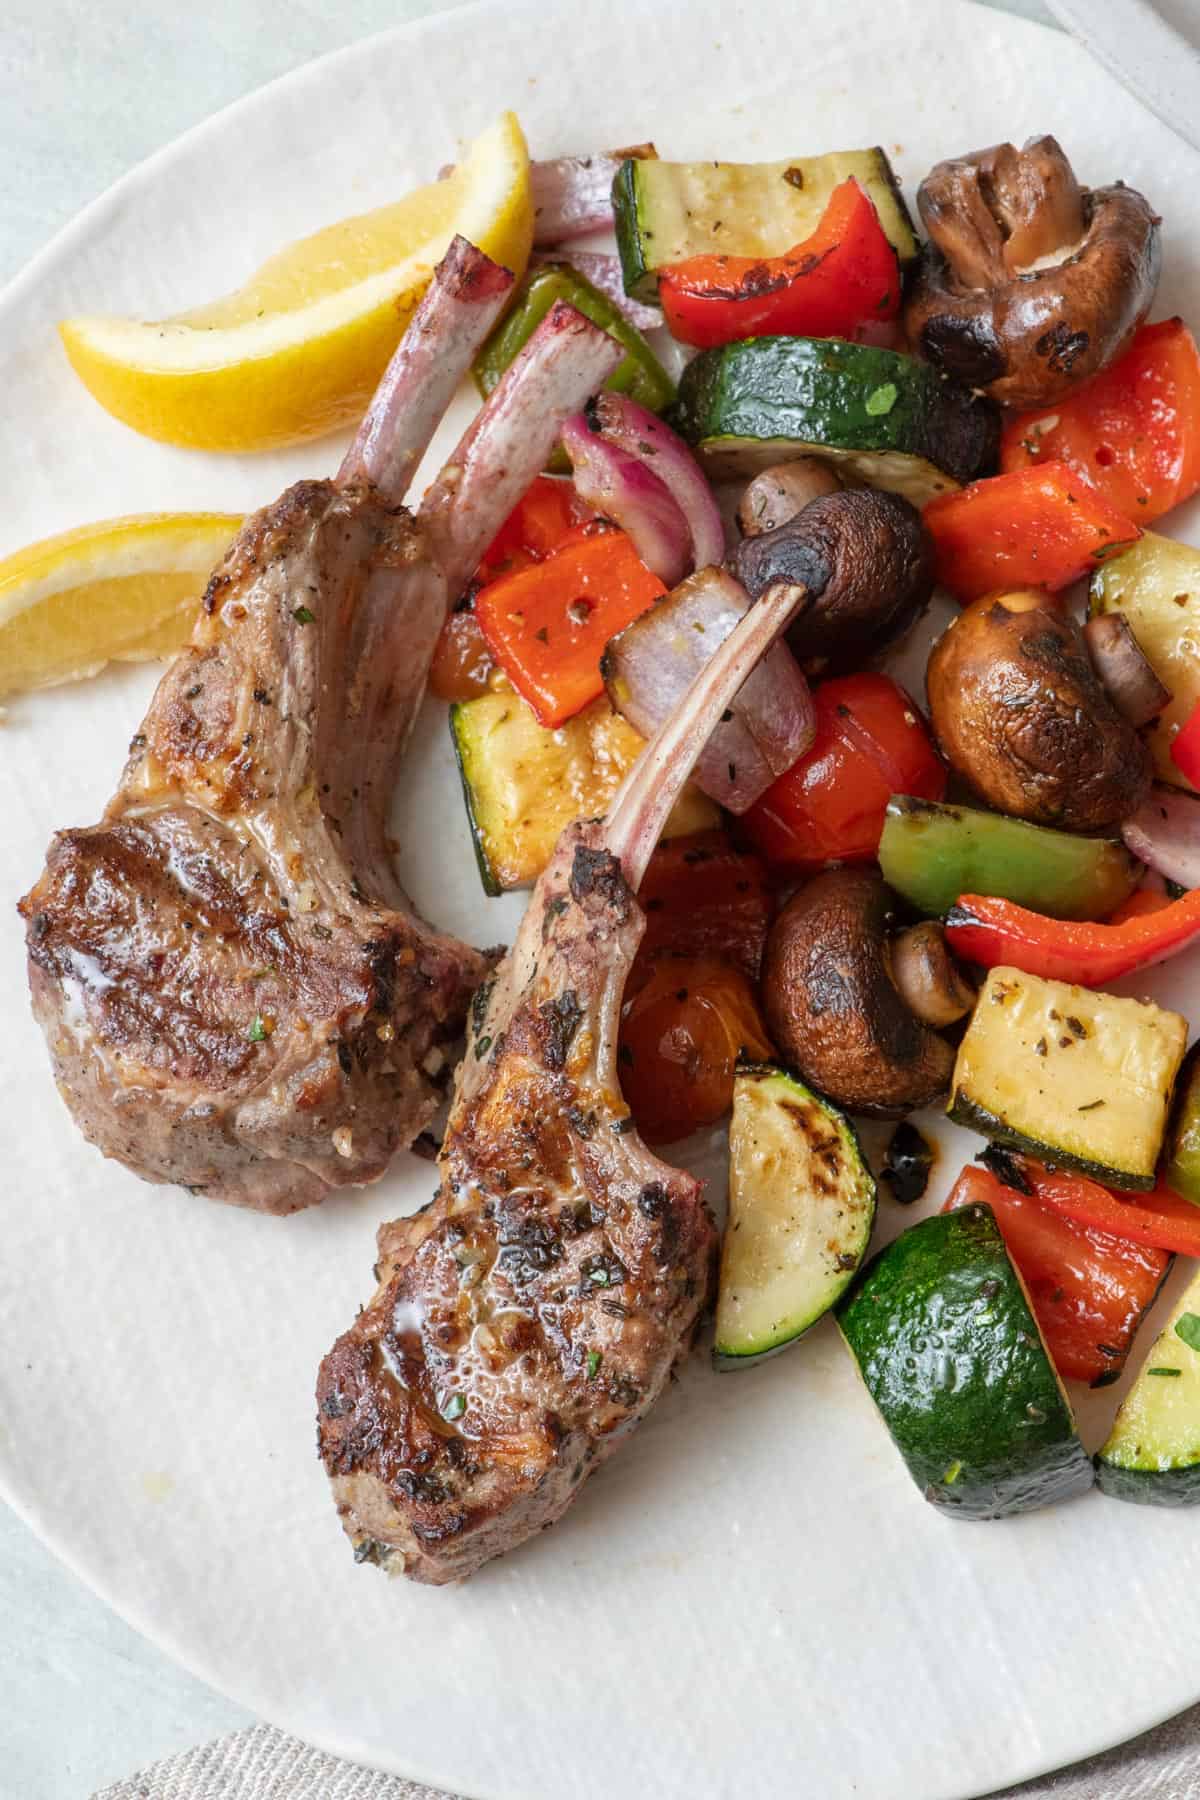 Grilled lamb chops on a serving plate with grilled veggies and lemon wedges.